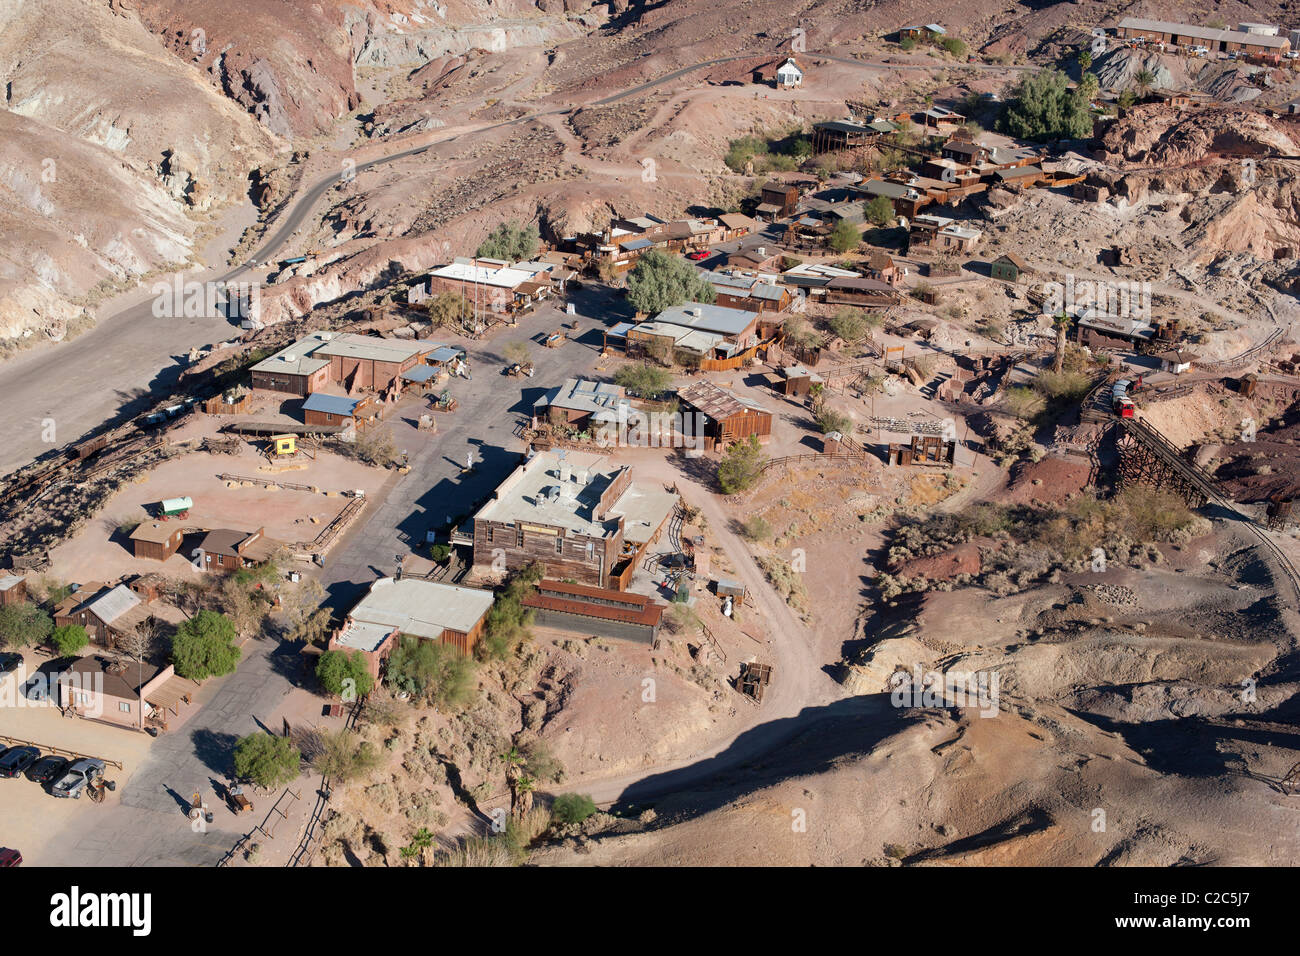 AERIAL VIEW. Calico, a silver mining town in the 1860's, now a touristic ghost town. Yermo, Mojave Desert, San Bernardino County, California, USA. Stock Photo